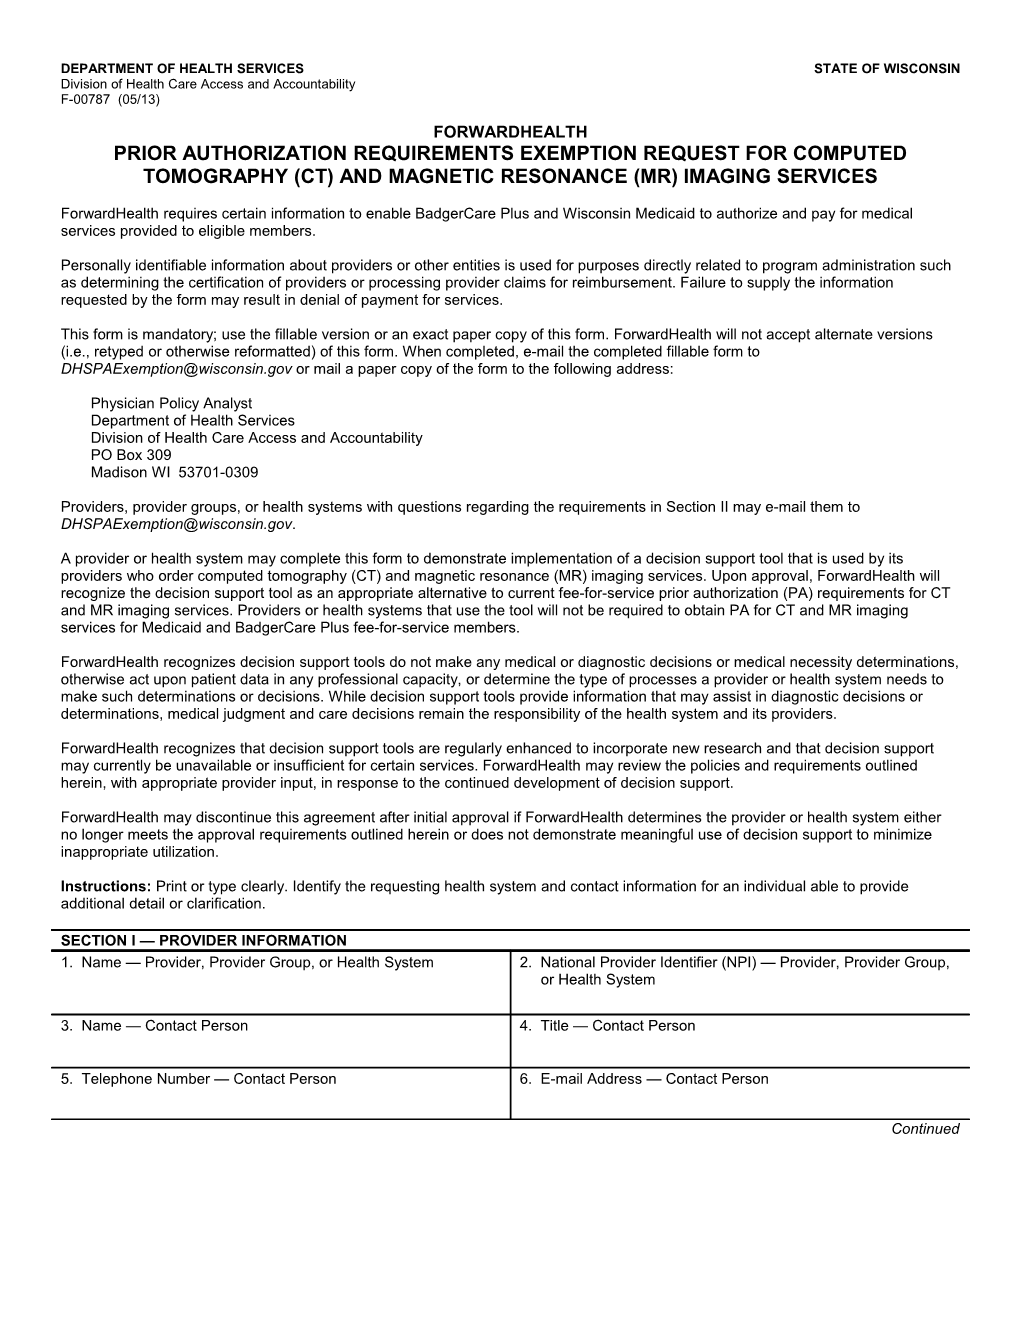 Forwardhealth - Prior Auth Requirements Exemption Request for Computeed Tomography And